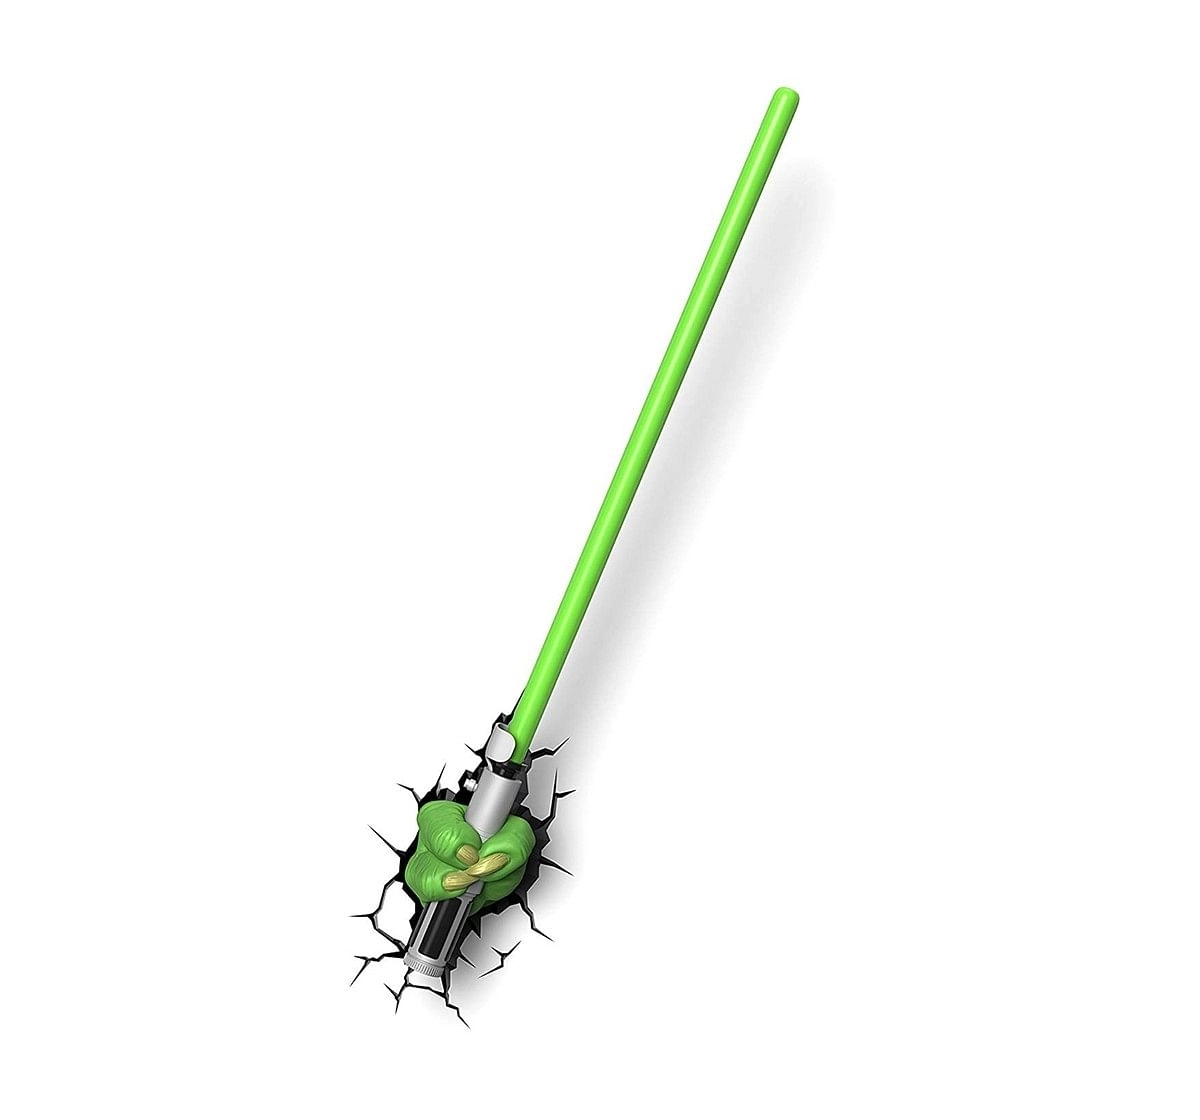 Star Wars Plastic And Metal Ep7 Star Wars Yoda Saber 3D Wall Deco Light for Kids age 4Y+ 